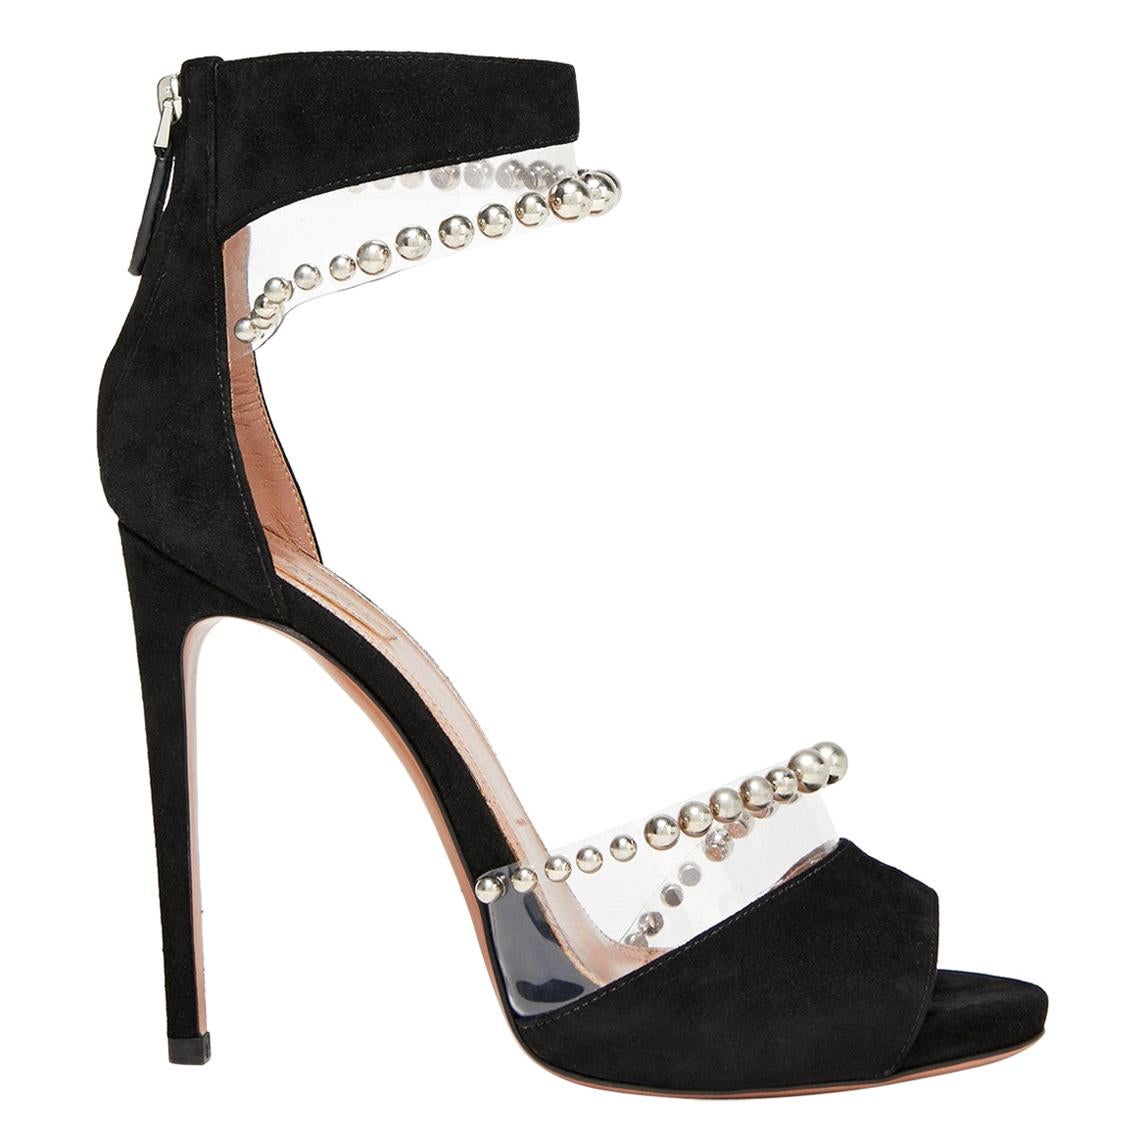 Azzedine Alaïa Bead-Embellished PVC and Suede Sandals